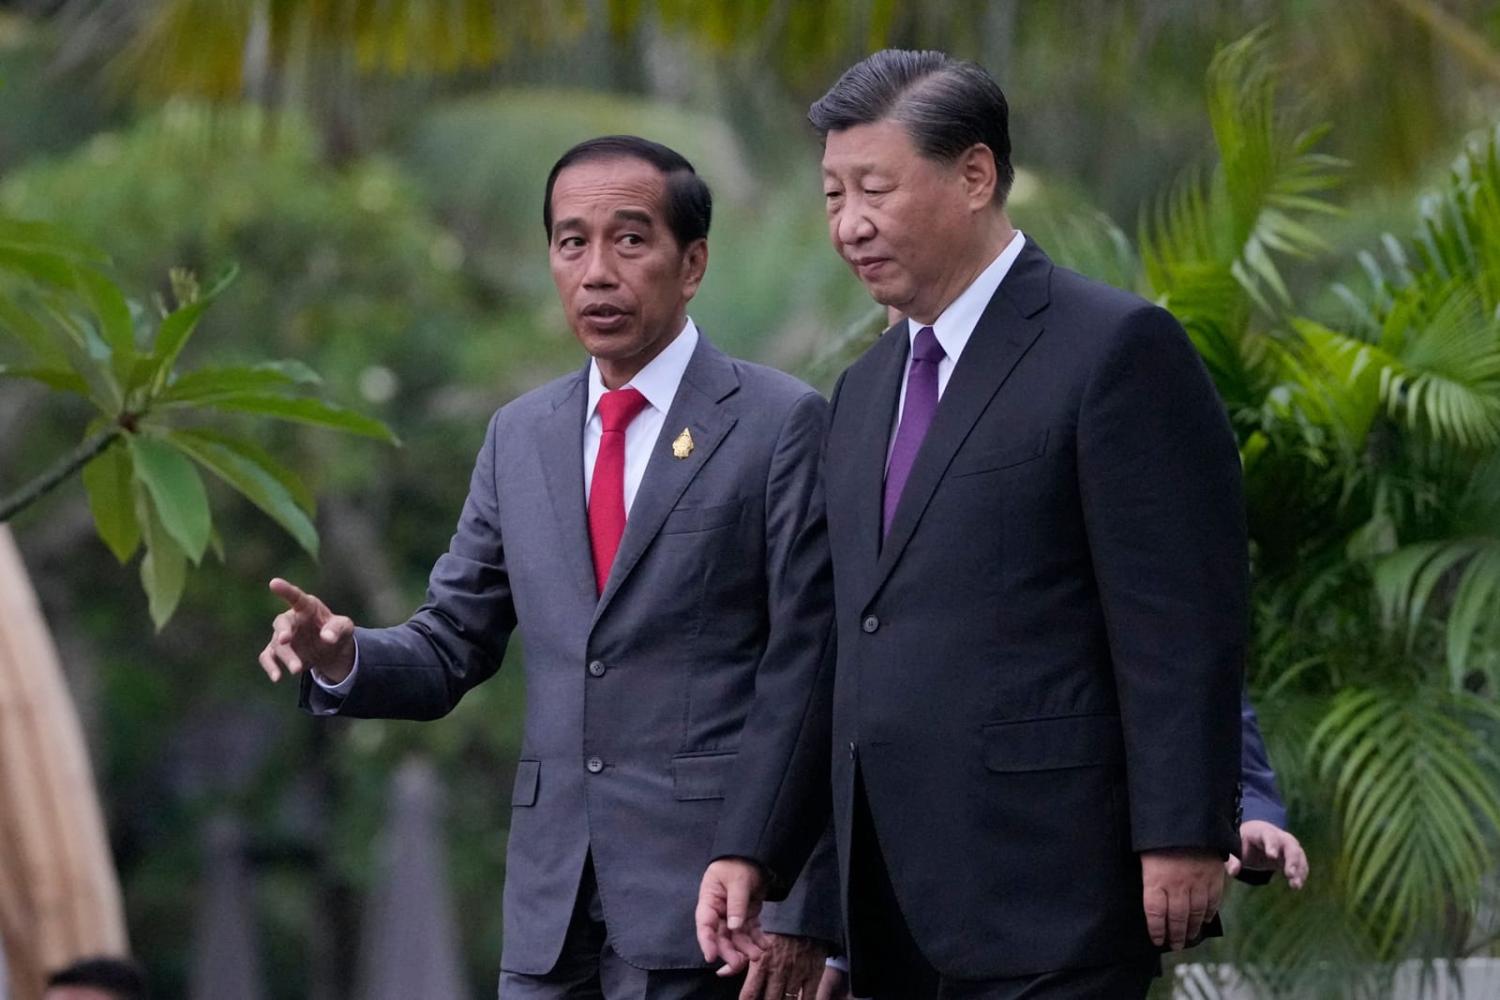 Indonesian officials have been careful to express appreciation for the invitation to China’s Global Security Initiative, but also made clear they have no intention of supporting or joining (Achmad Ibrahim via AFP/Getty Images)